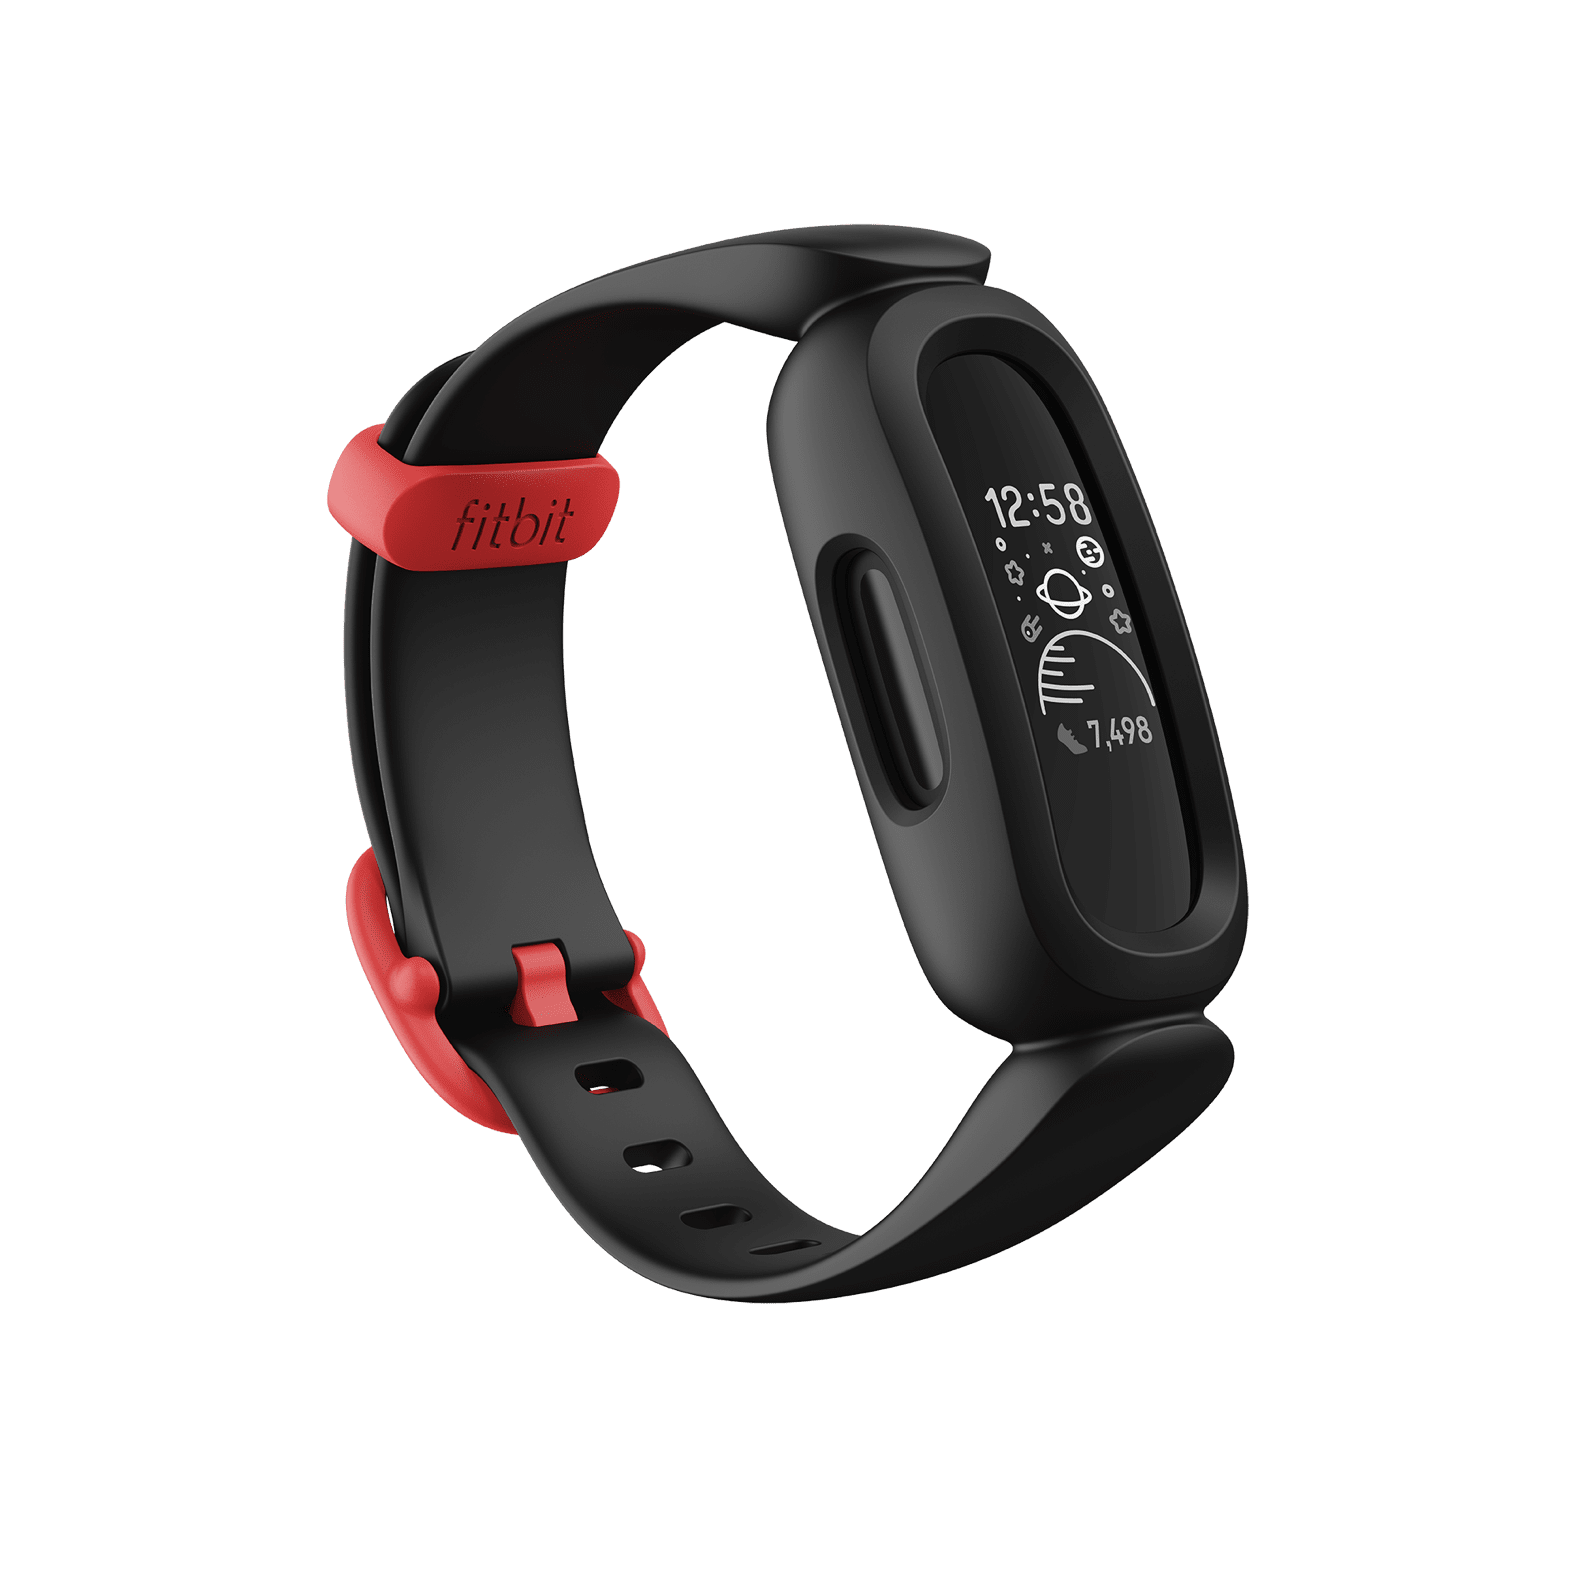 can you track your child with a fitbit